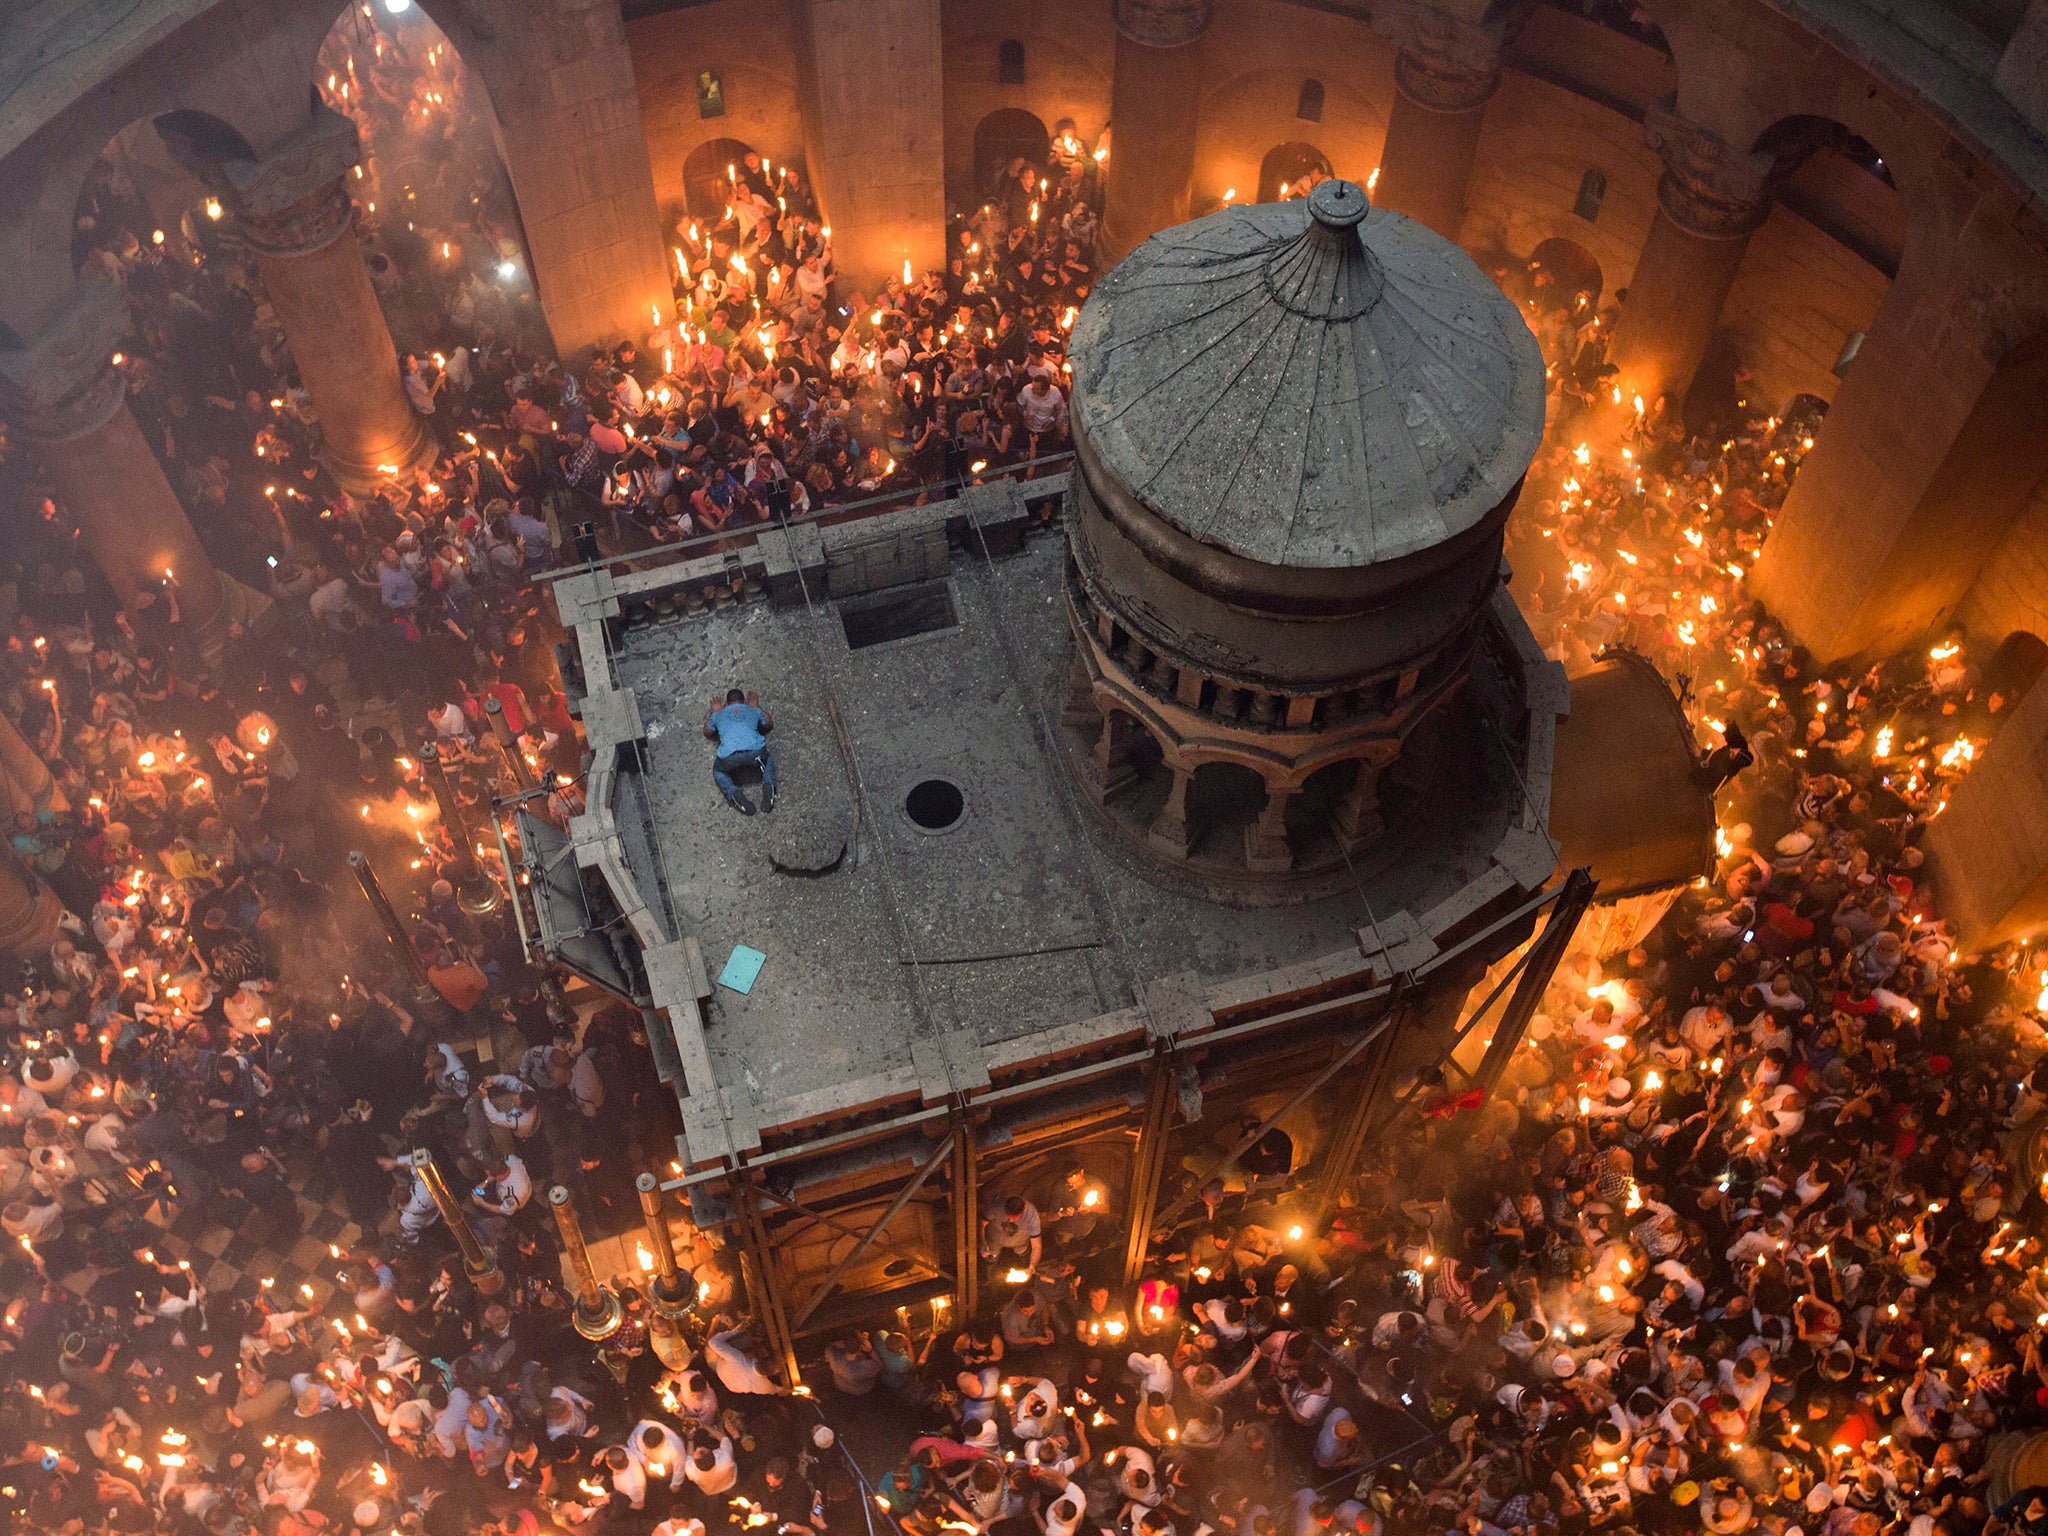 Worshippers celebrate the miracle of the Holy Fire at the Tomb of Christ in Jerusalem